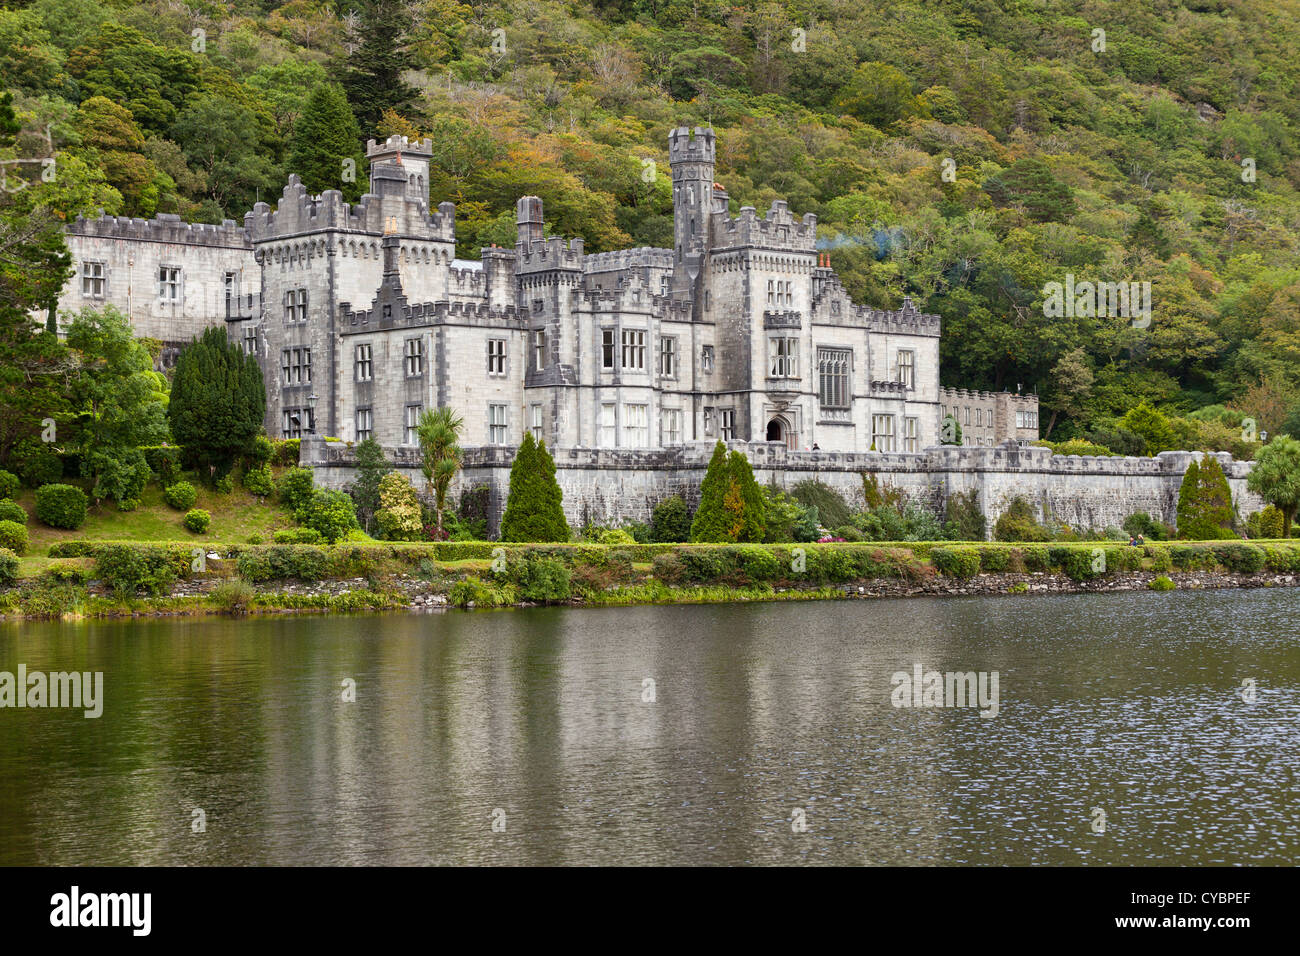 Kylemore Abbey Benedictine monastery founded in 1920 on the grounds of Kylemore Castle, in Connemara, County Galway, Ireland. Stock Photo